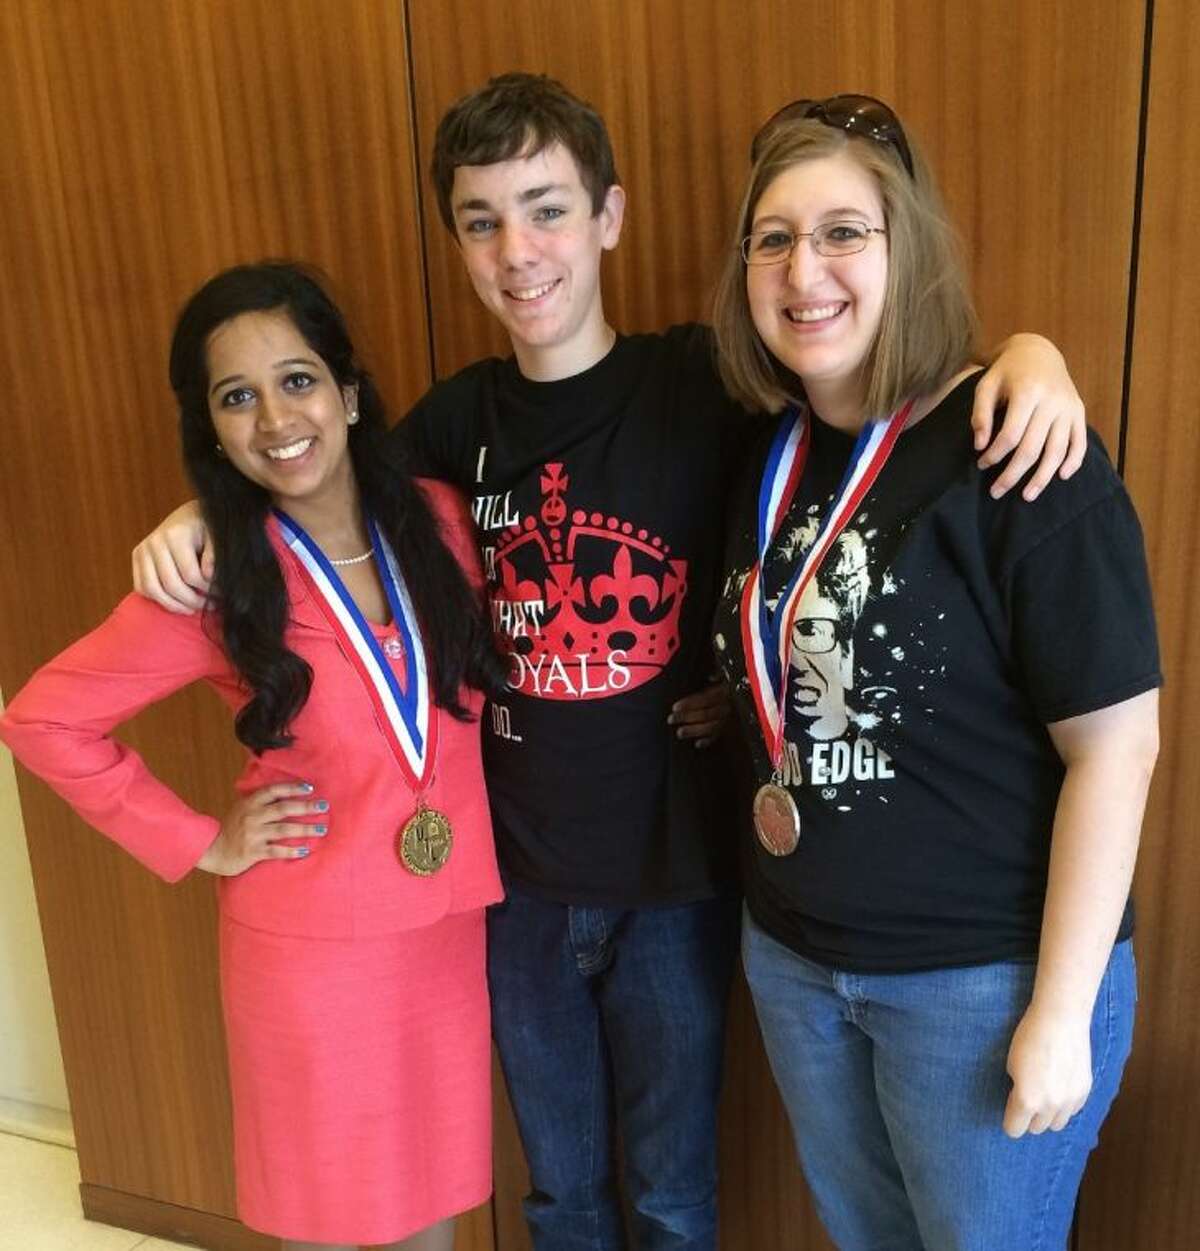 Cypress Creek High School seniors (L-R) Caro Achar (first place, Persuasive Speaking) and Christian Kimbell (top 10, Persuasive Speaking) and sophomore Rosalind Williamson (second place, Editorial Writing) placed in their respective events at the UIL Academics Spring Meet.